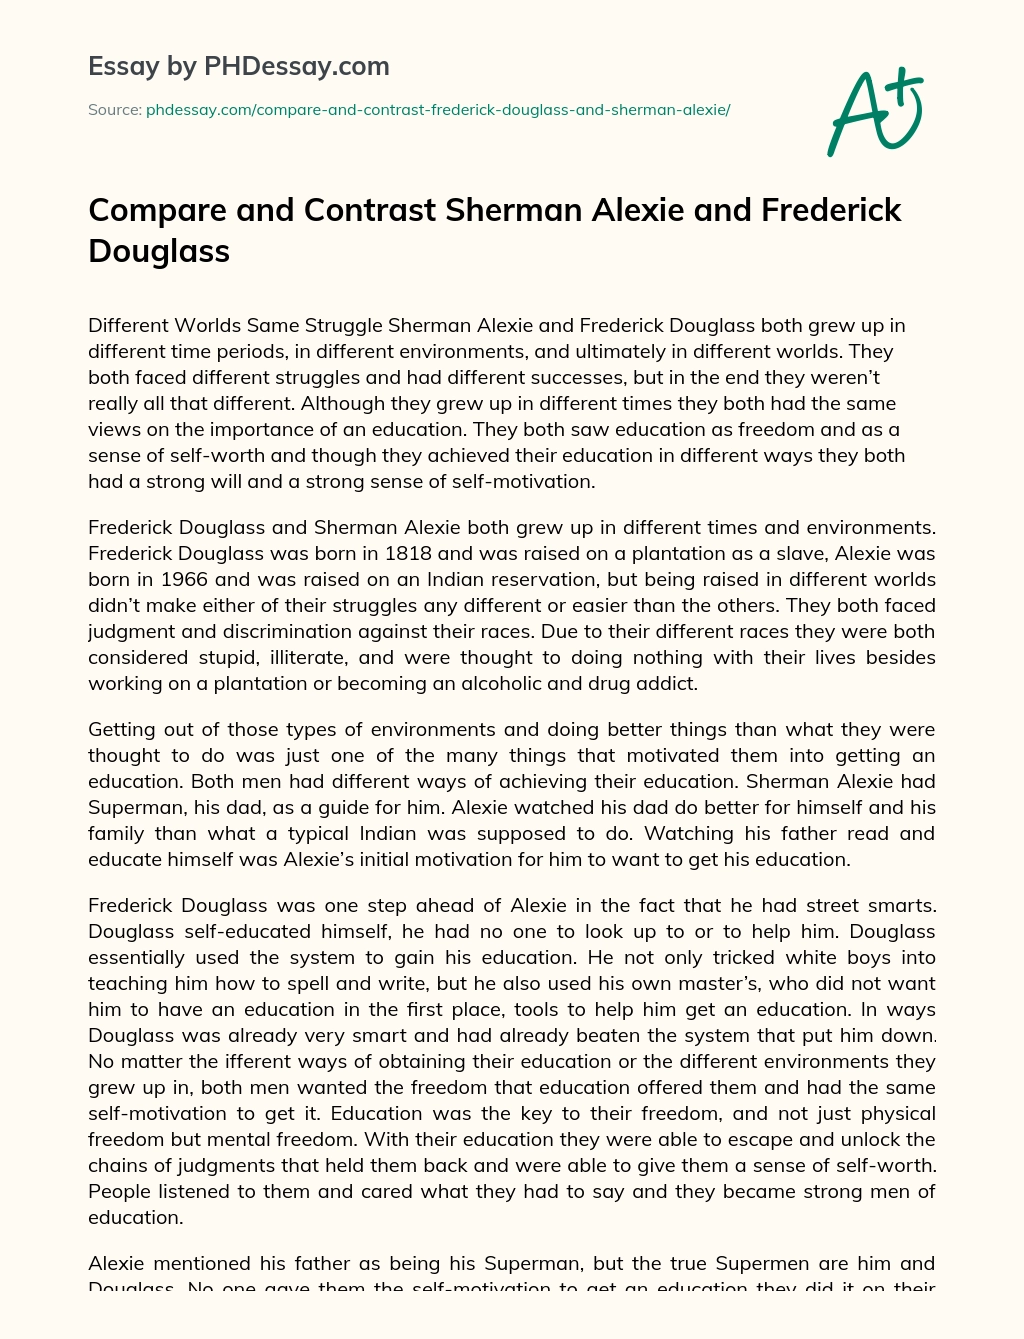 Compare and Contrast Sherman Alexie and Frederick Douglass essay